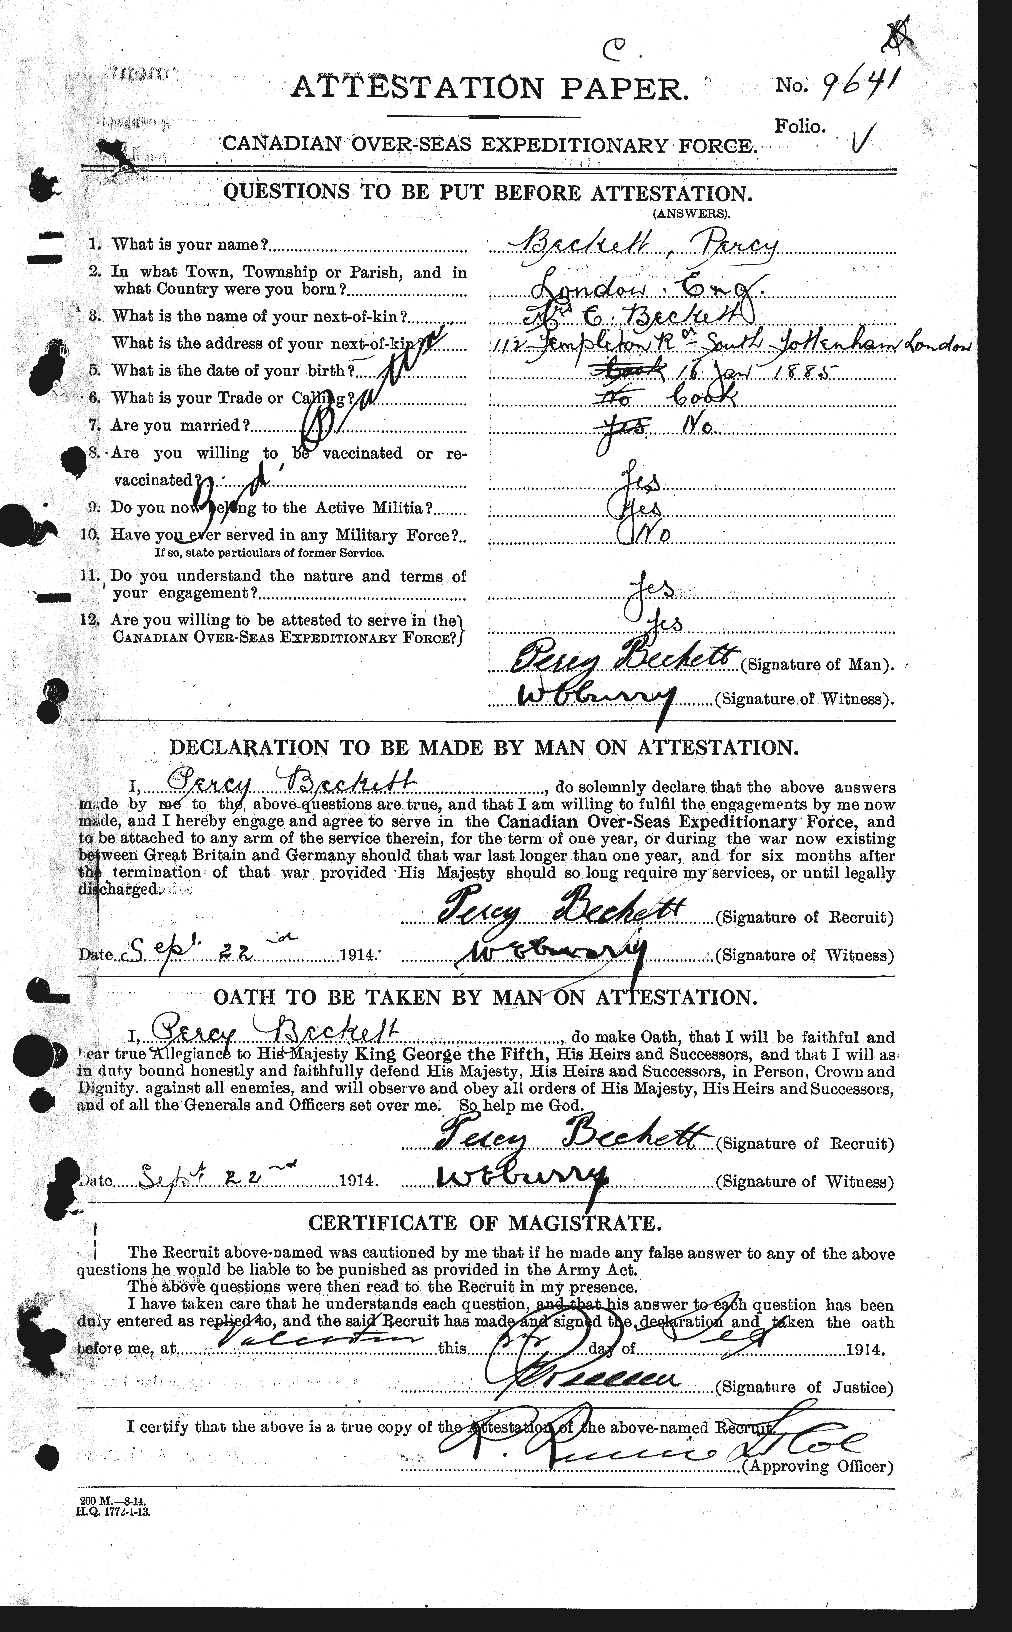 Personnel Records of the First World War - CEF 229961a